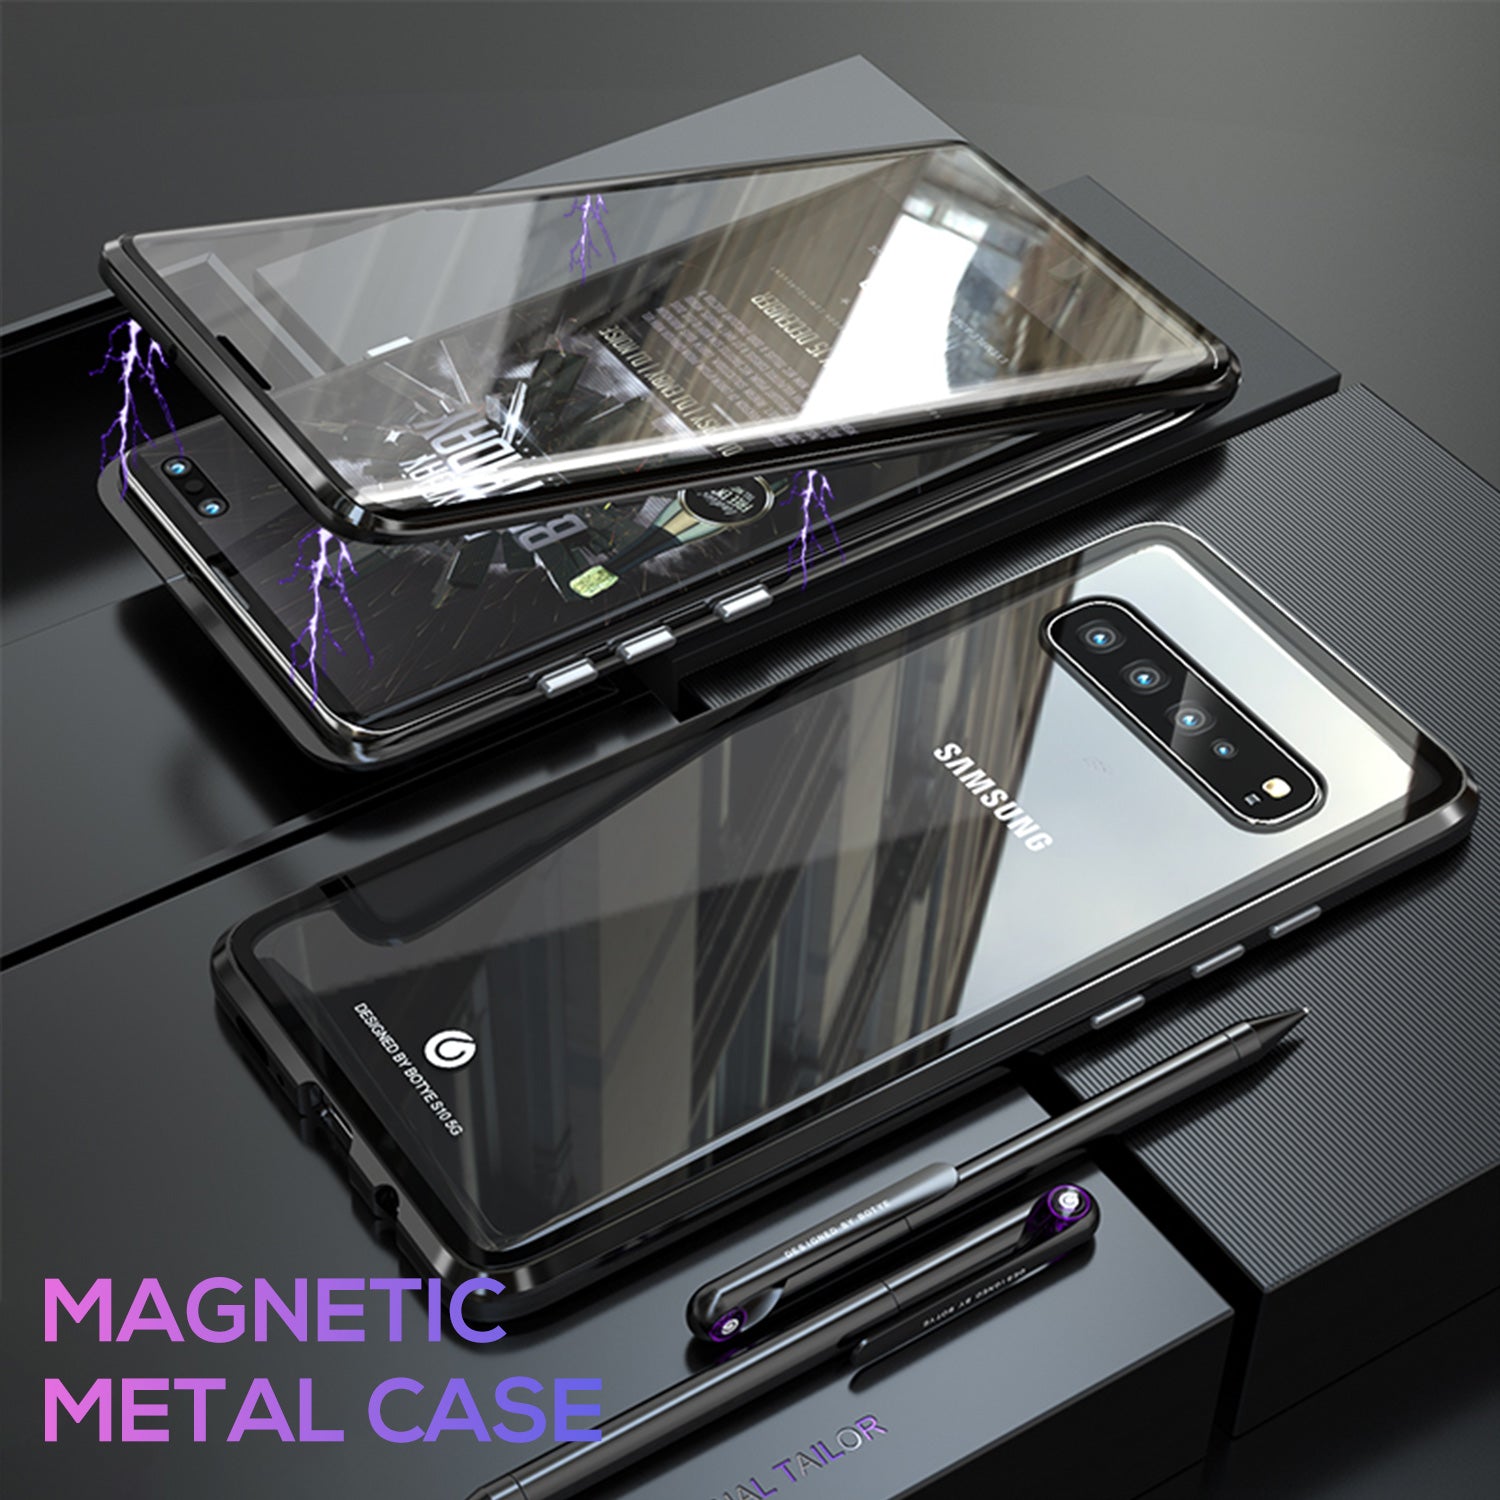 For Galaxy S10 Magnetic Metal Tempered Glass Case Cover-Black, White, Red